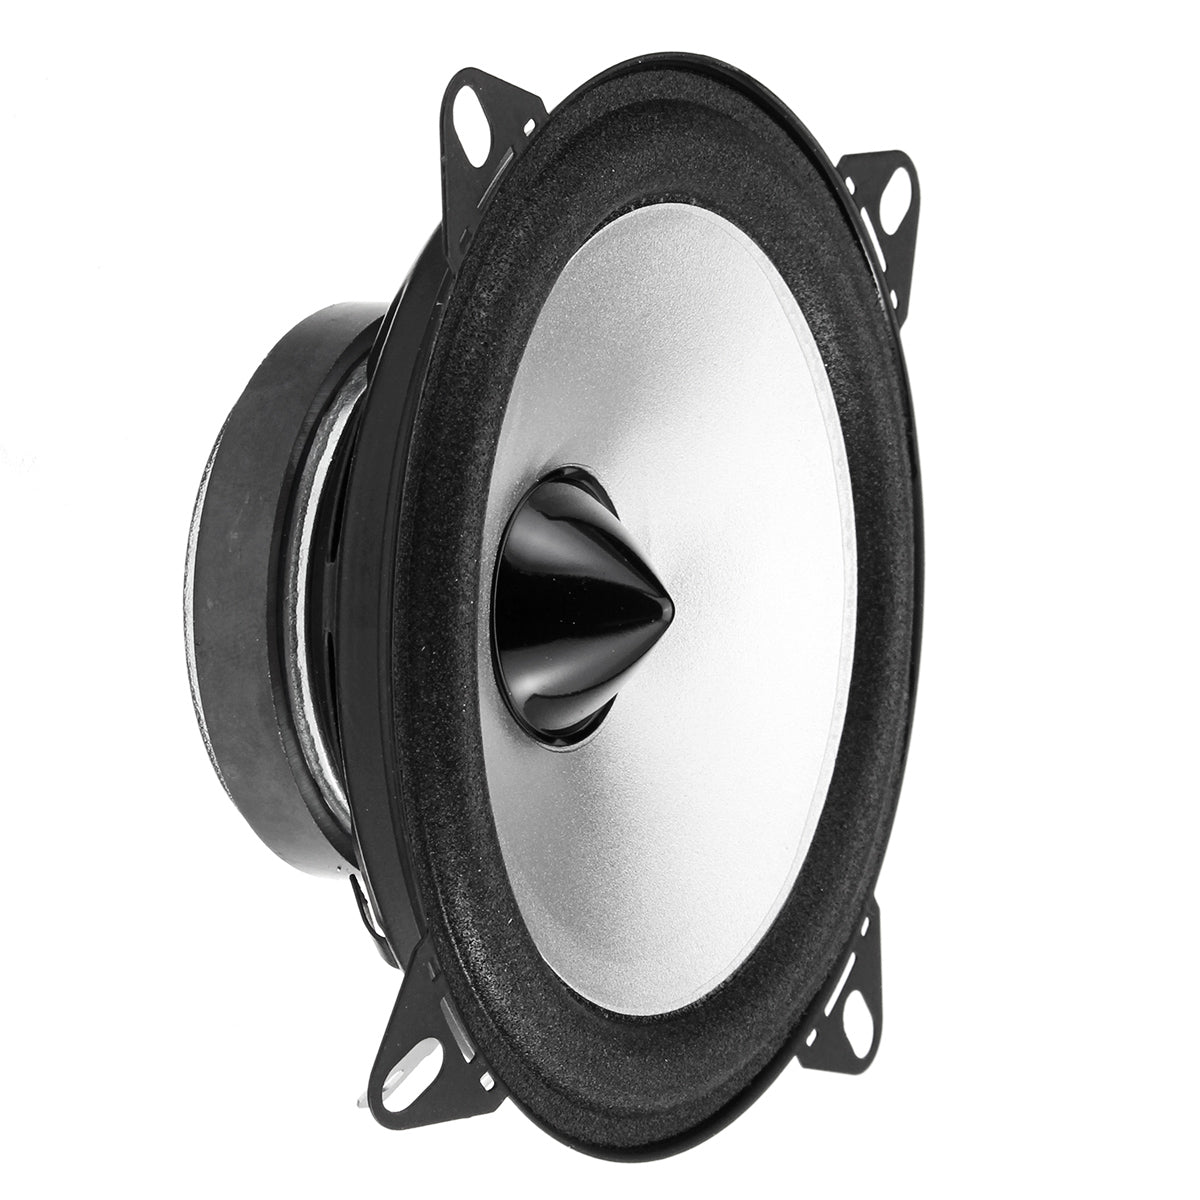 4 Inch 60W 88dB Car Audio Coaxial Speakers Systems Stereo Loudspeaker Subwoofer